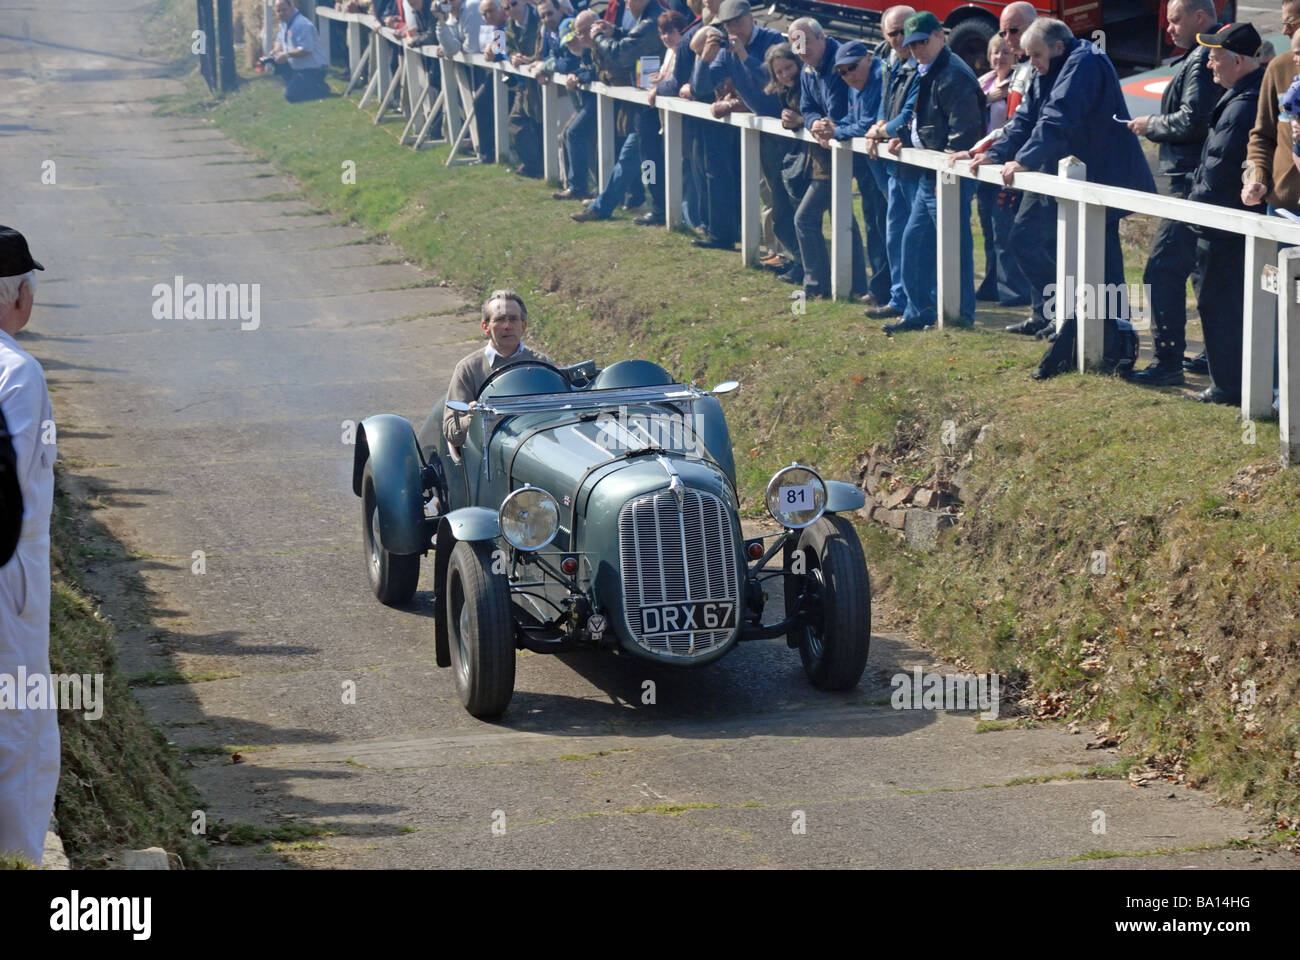 DRX 67 a 1935 Hudson Spikins Special Neil Thorp ascending at speed on the Brooklands Museum Test Hill Challenge celebrating the Stock Photo